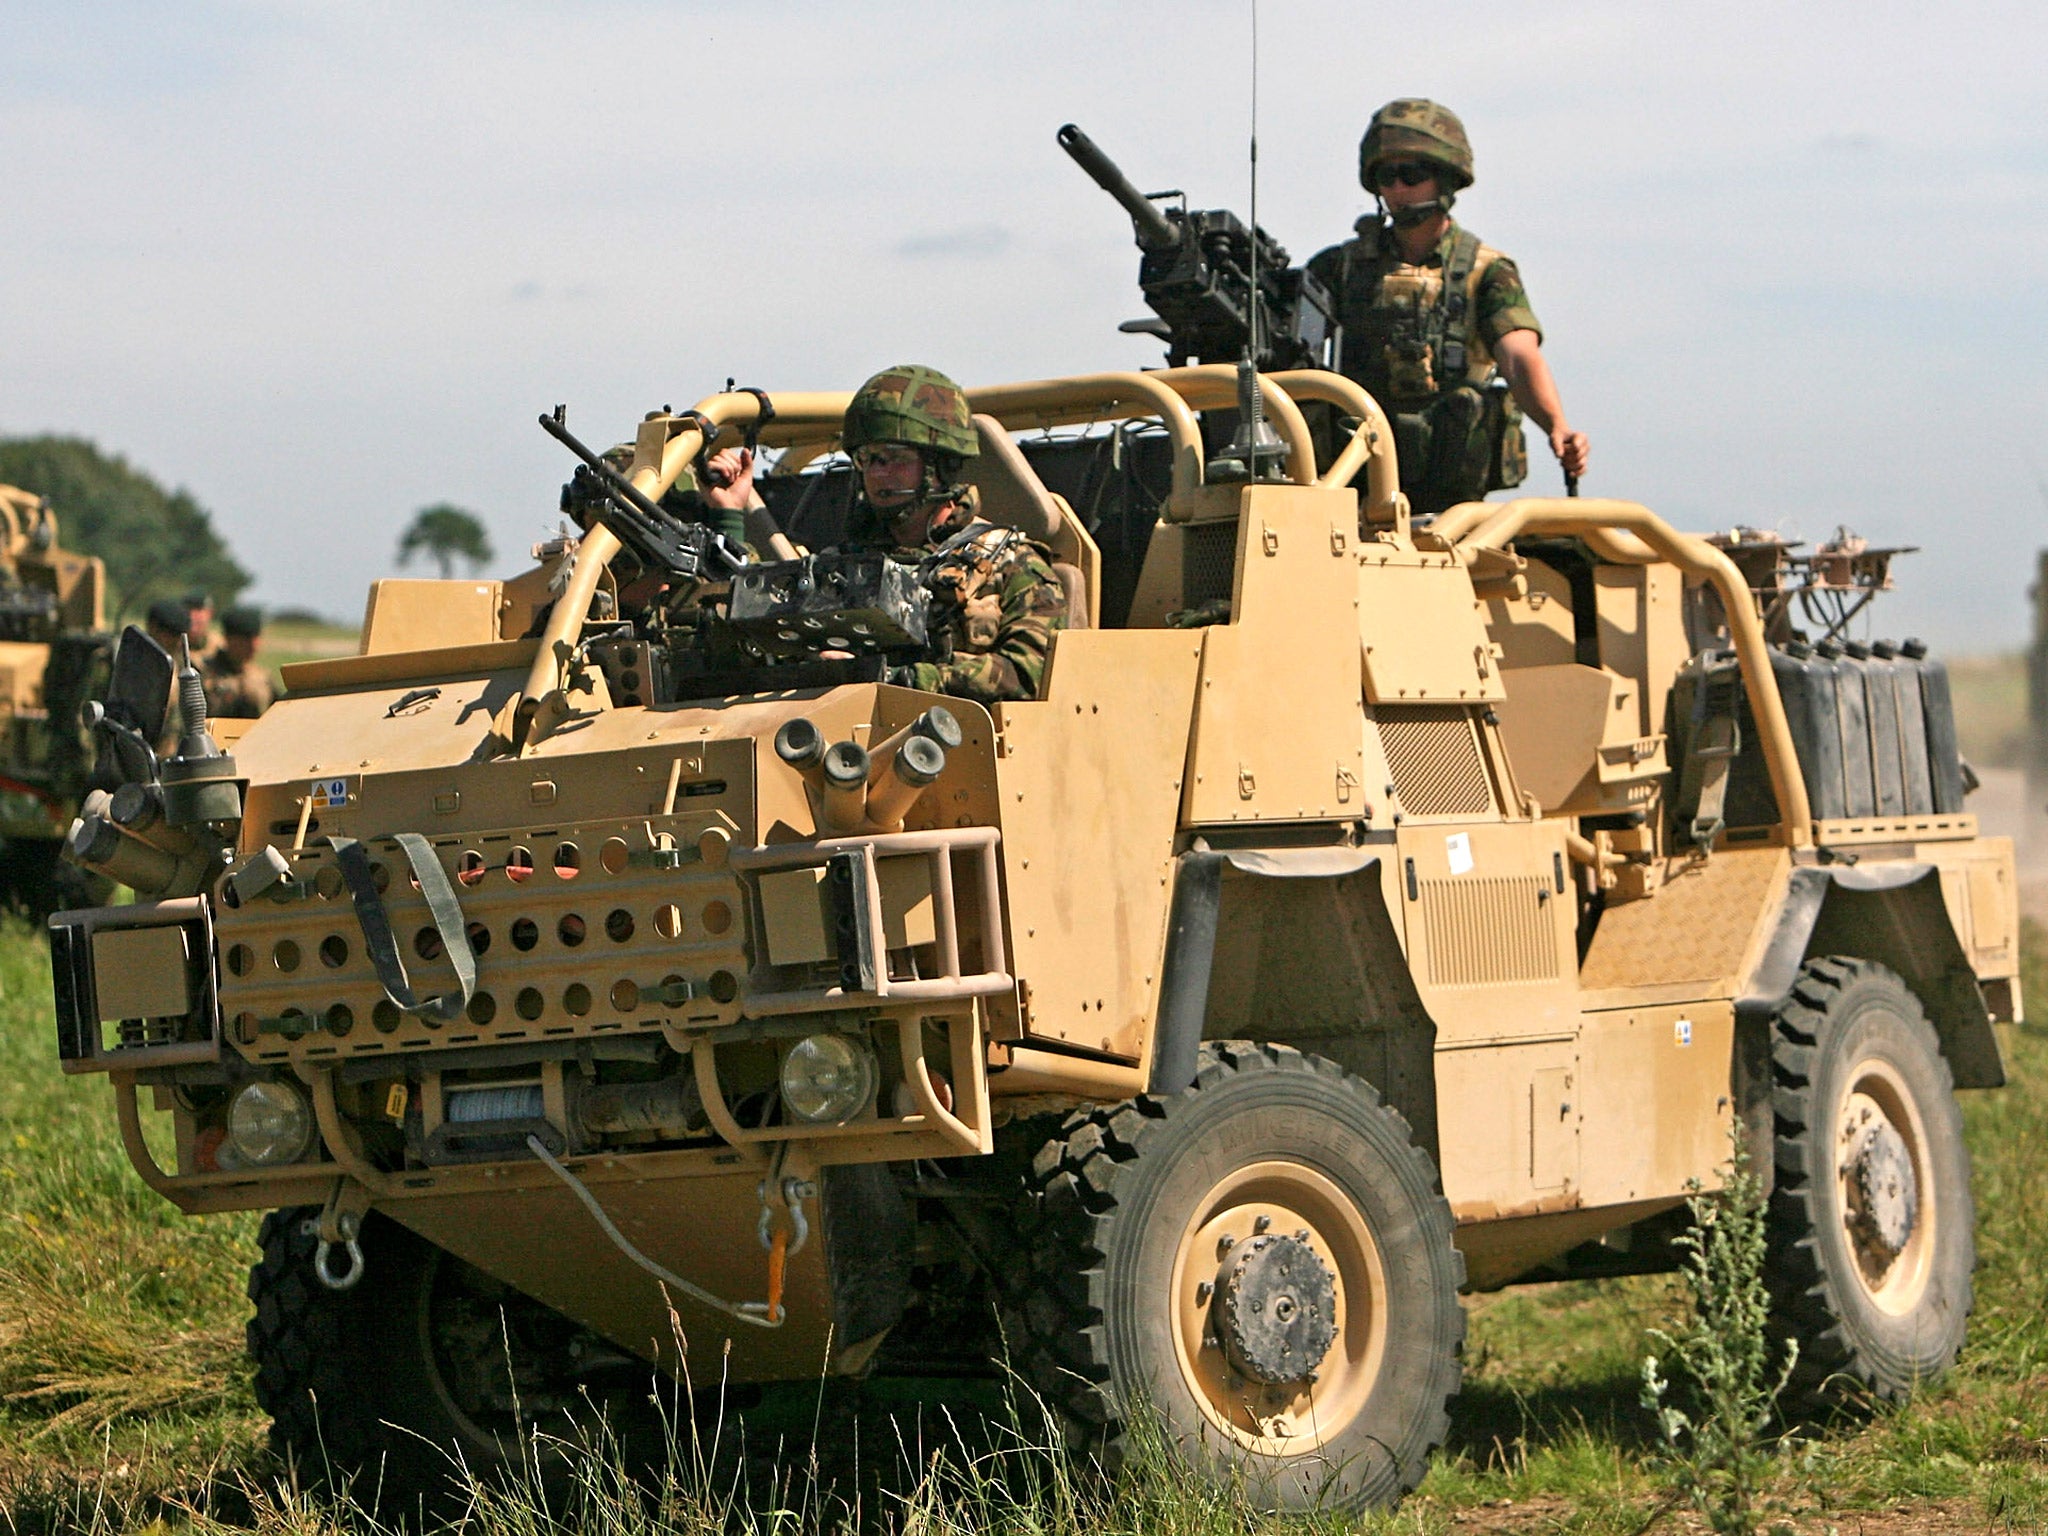 A Jackal armoured vehicle, which cost £350,000 each